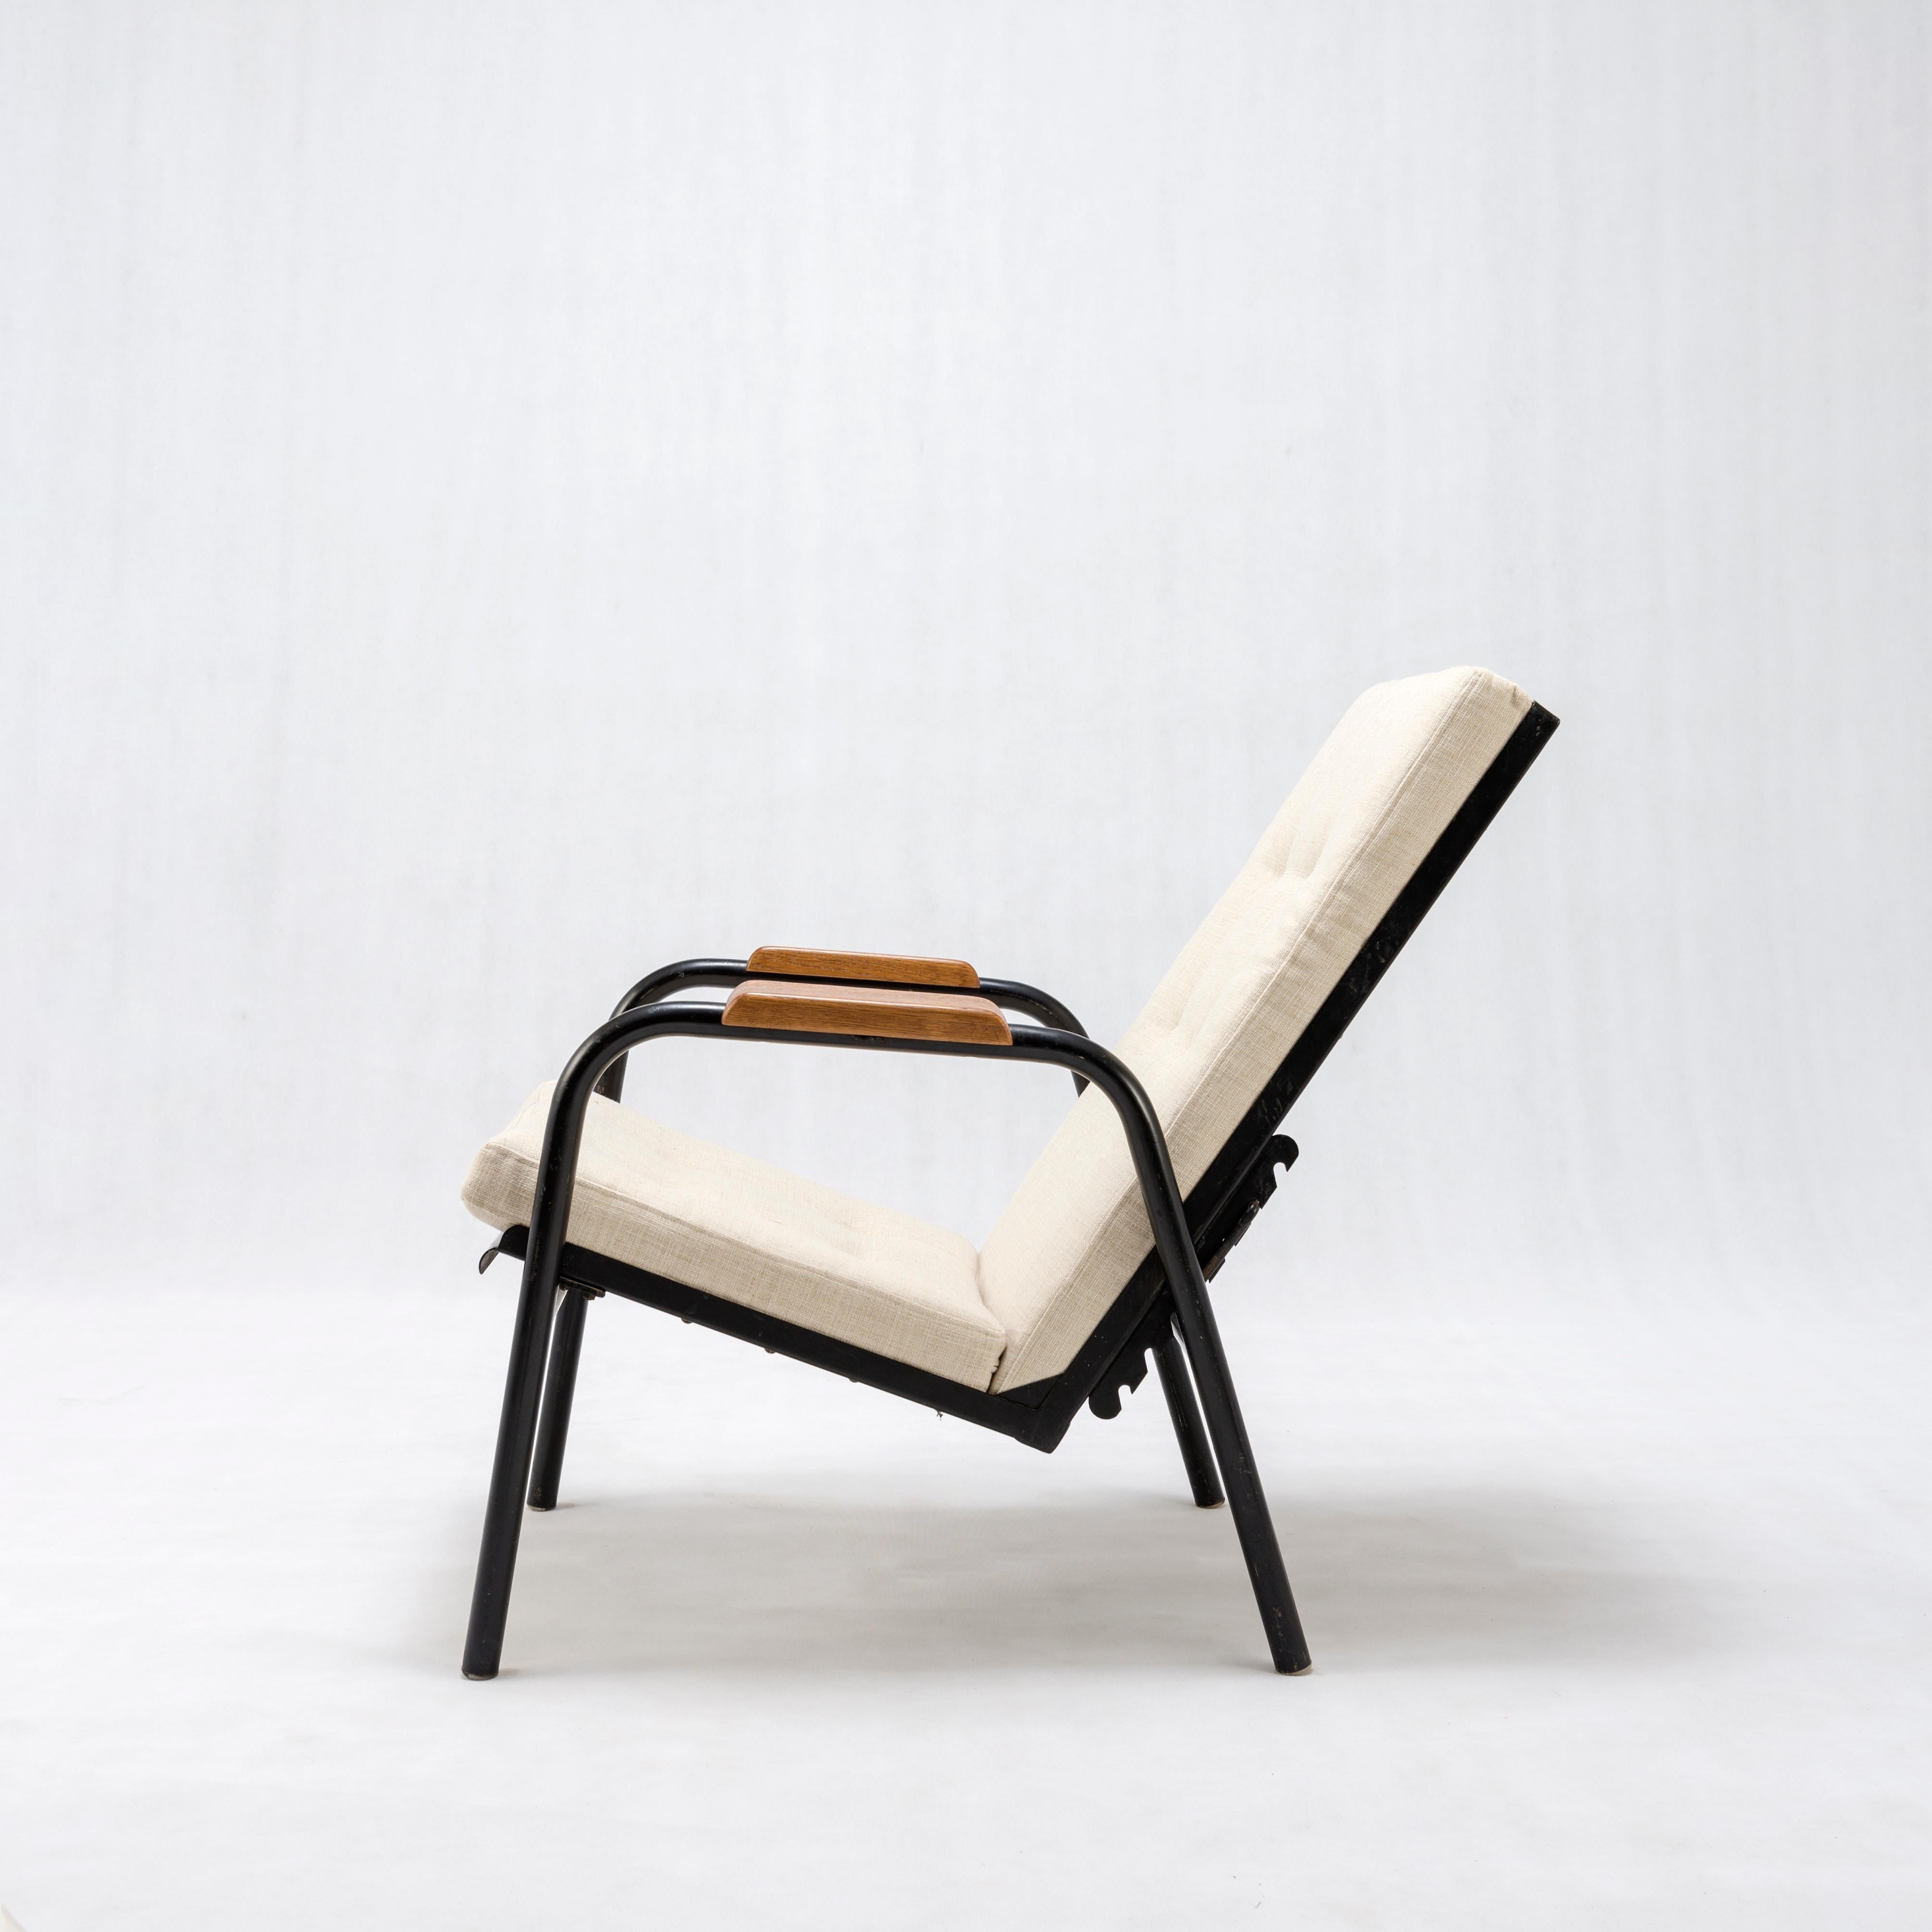 Jean Prouvé armchair with reclining system
Provenance: Religious Community of Lorraine
Black painted metal, wood
Reupholstered in beige linen
France, circa 1950.